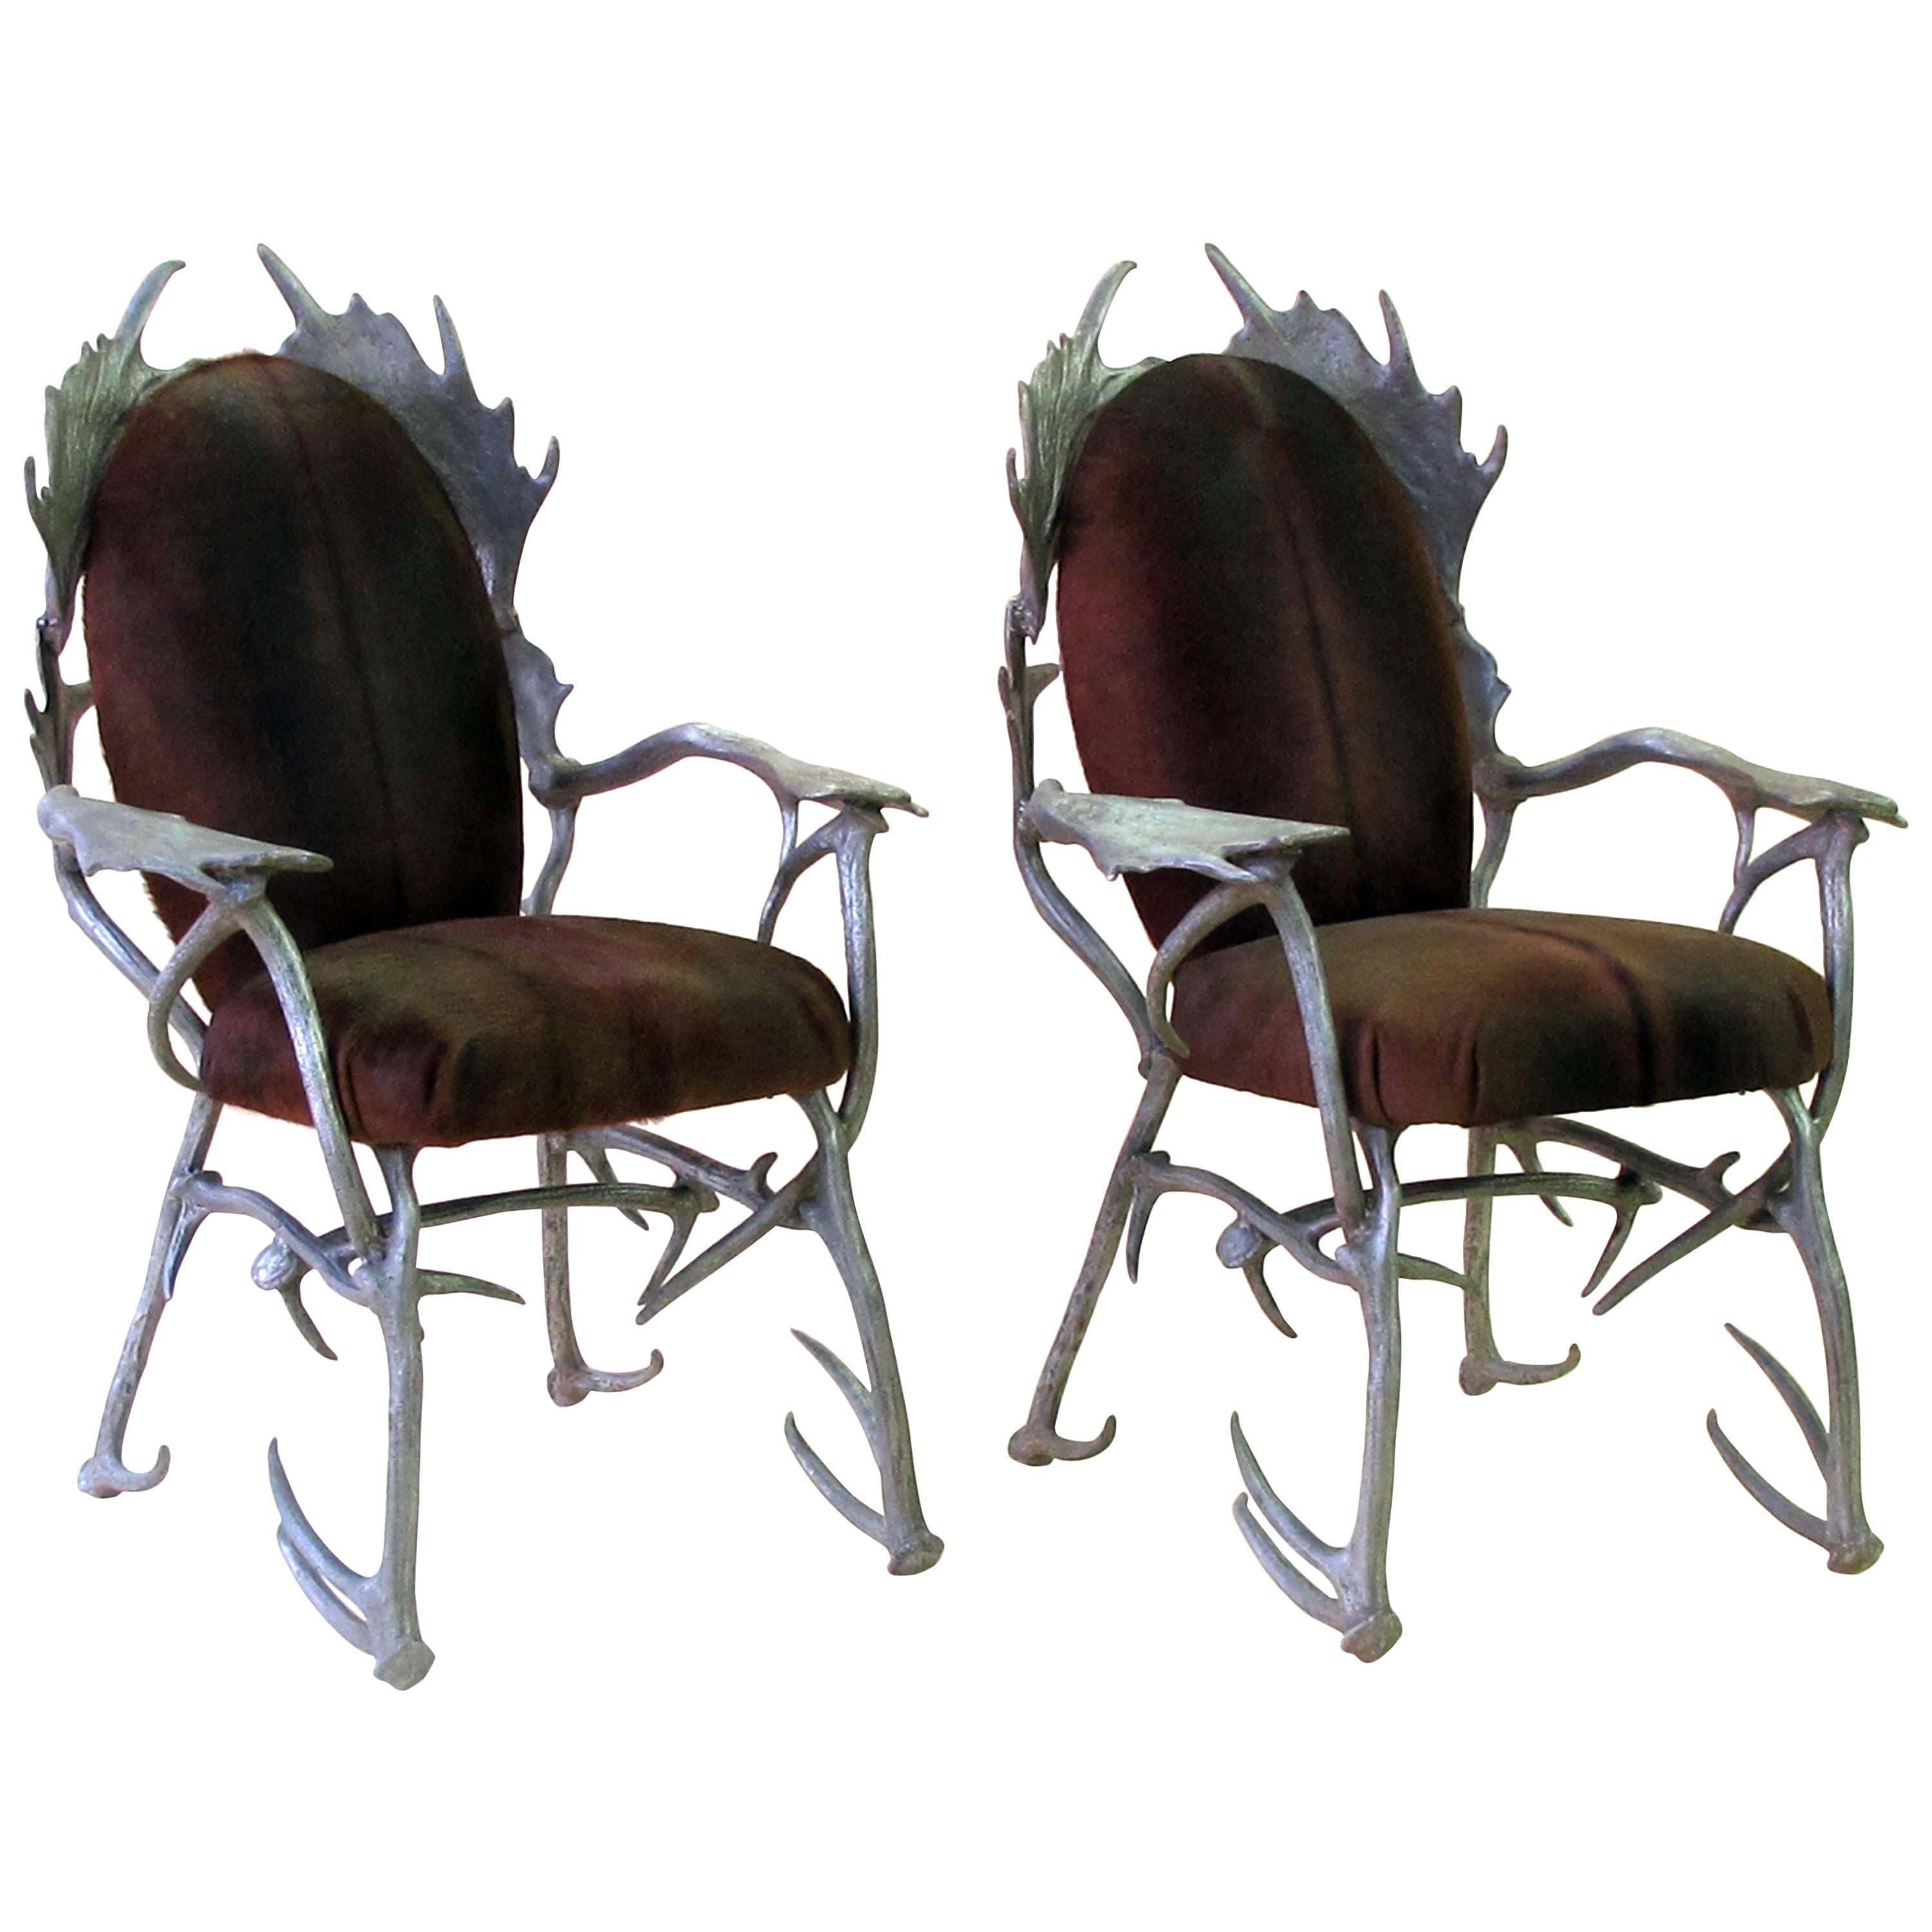 Fanciful Pair of American Aluminum Antler Armchairs Designed by Arthur Court